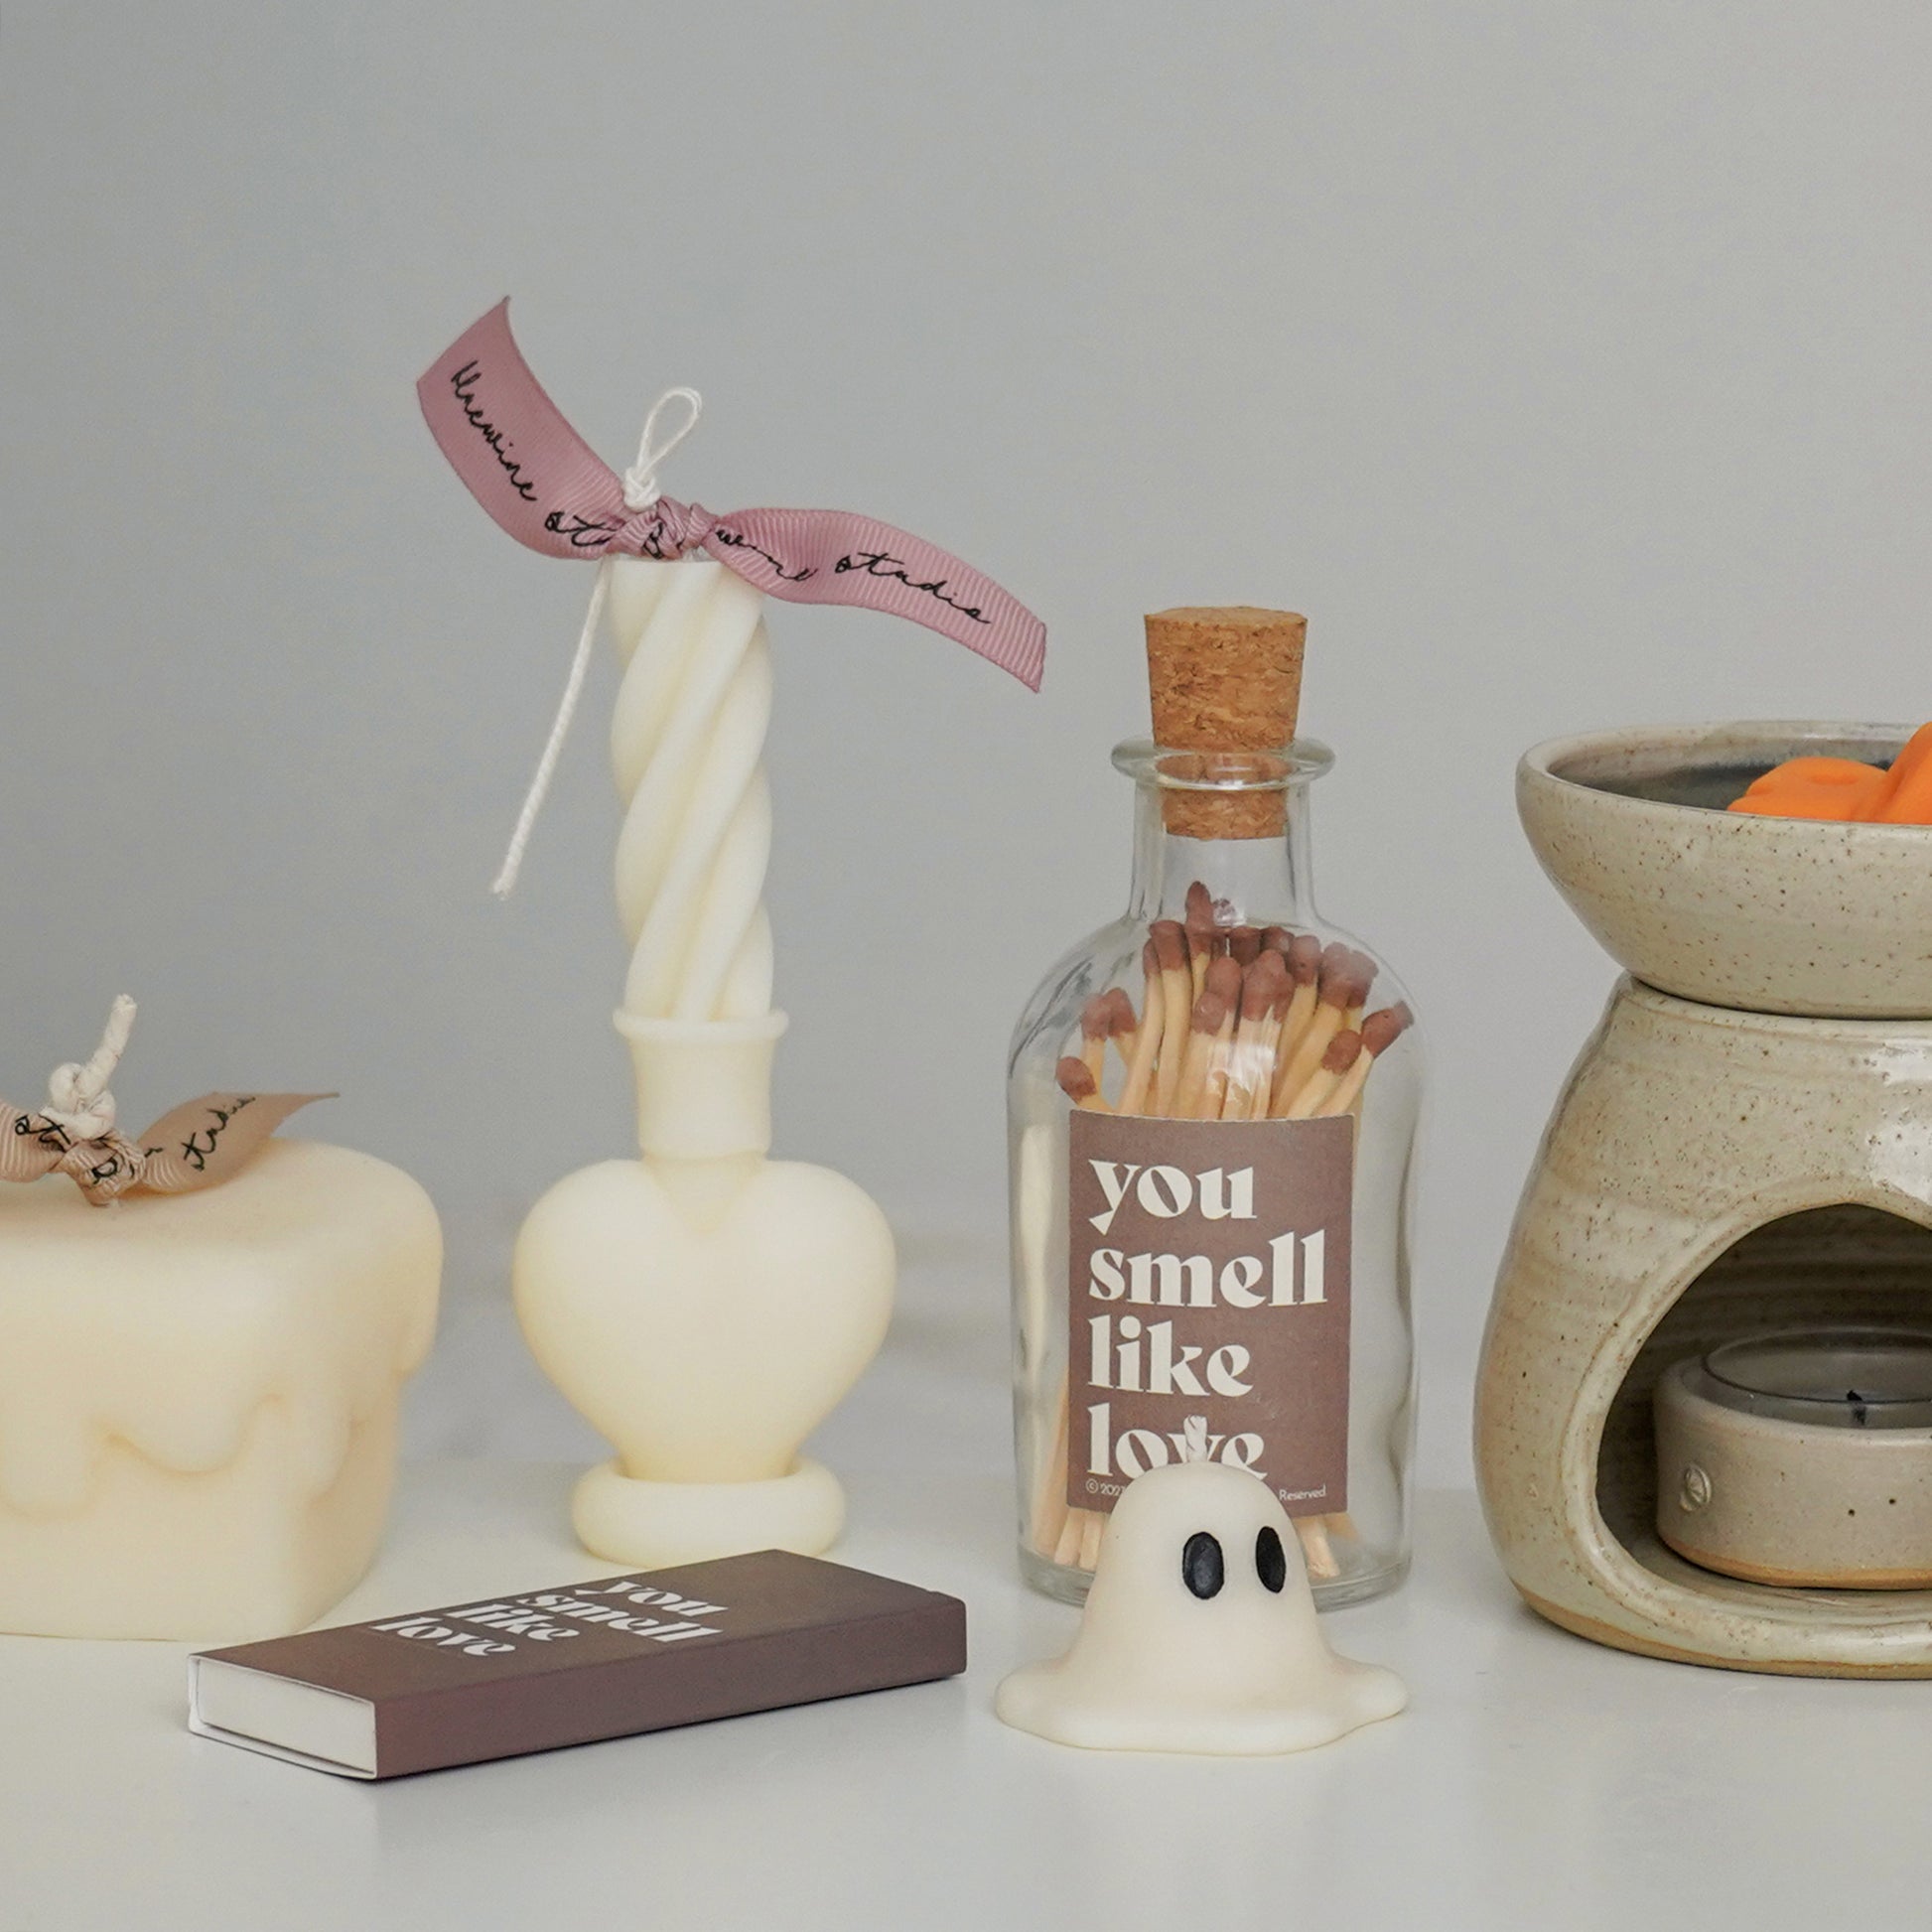 a heart twist taper candle, a mini ghost candle, a brown matchbox, a match bottle, and cheese wax melts in a wax warmer on the white table